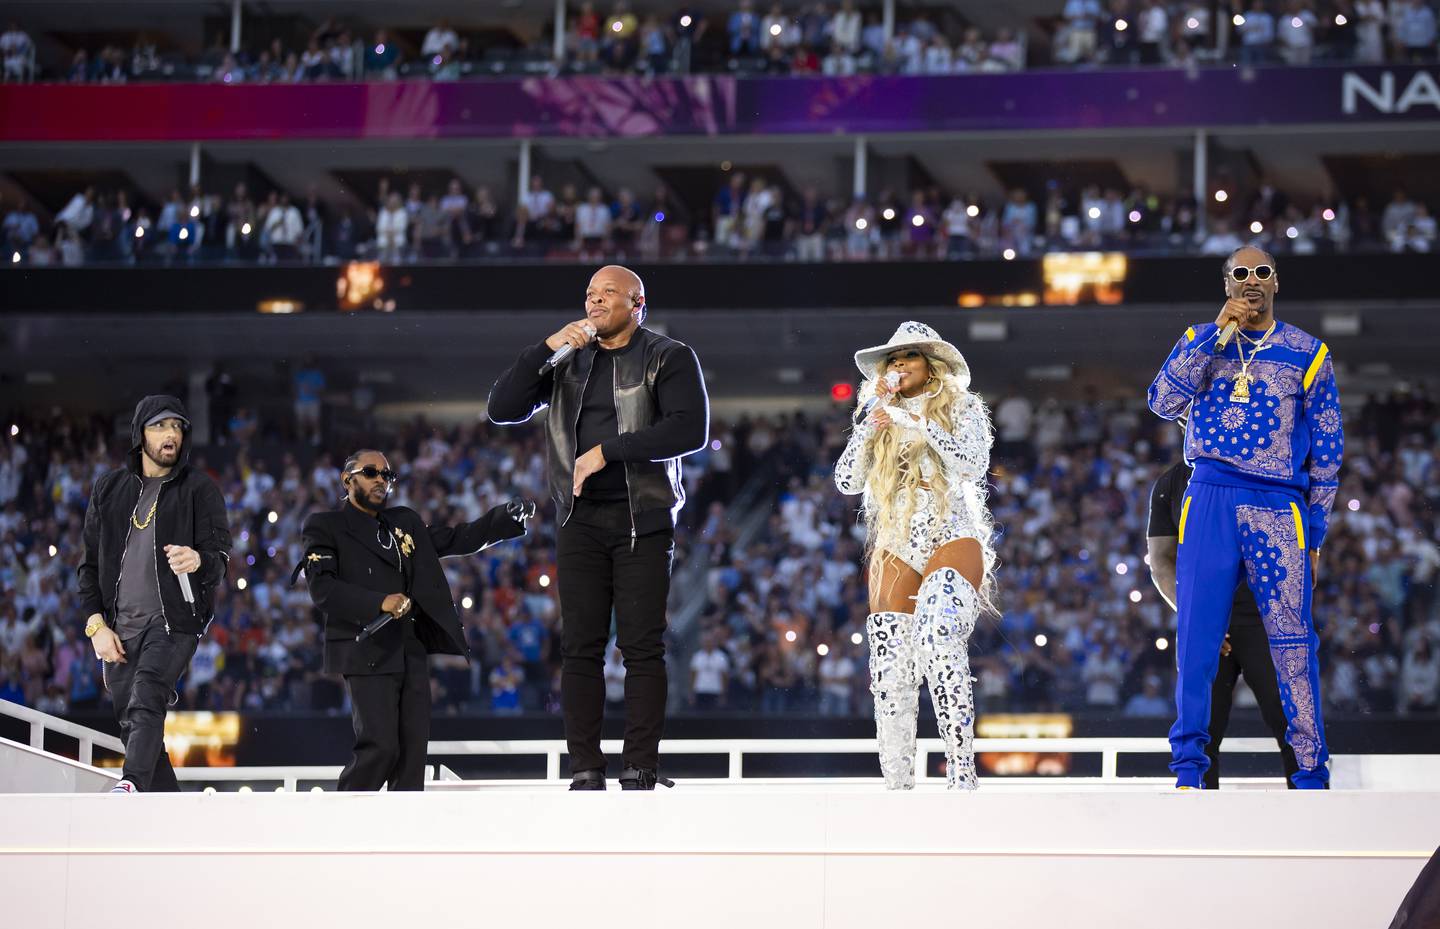 From left: Eminem, Kendrick Lamar, Dr Dre, Mary J Blige, 50 Cent and Snoop Dogg performed at this year's half-time Super Bowl show. Photo: Mark J Rebilas